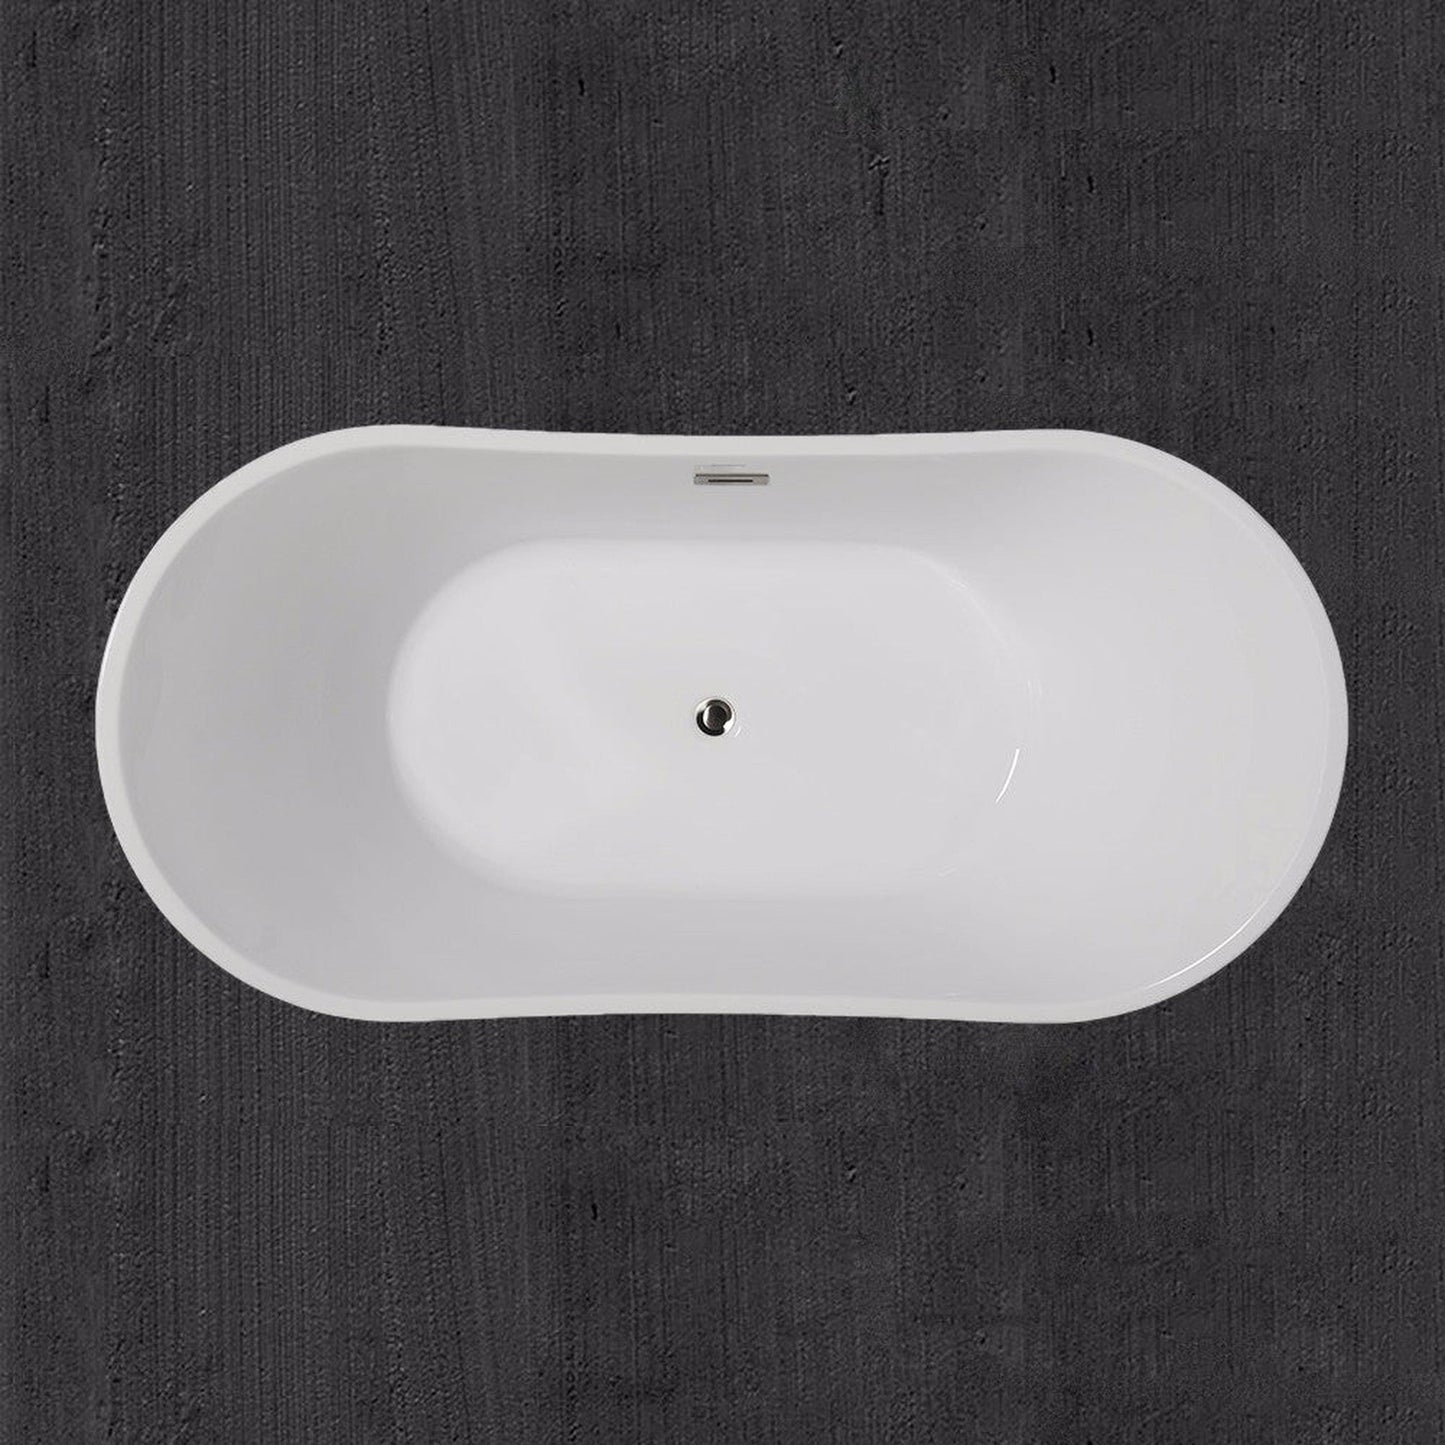 WoodBridge B0010 67" White Acrylic Freestanding Contemporary Soaking Bathtub With Brushed Nickel Drain, Overflow, F0023BNRD Tub Filler and Caddy Tray